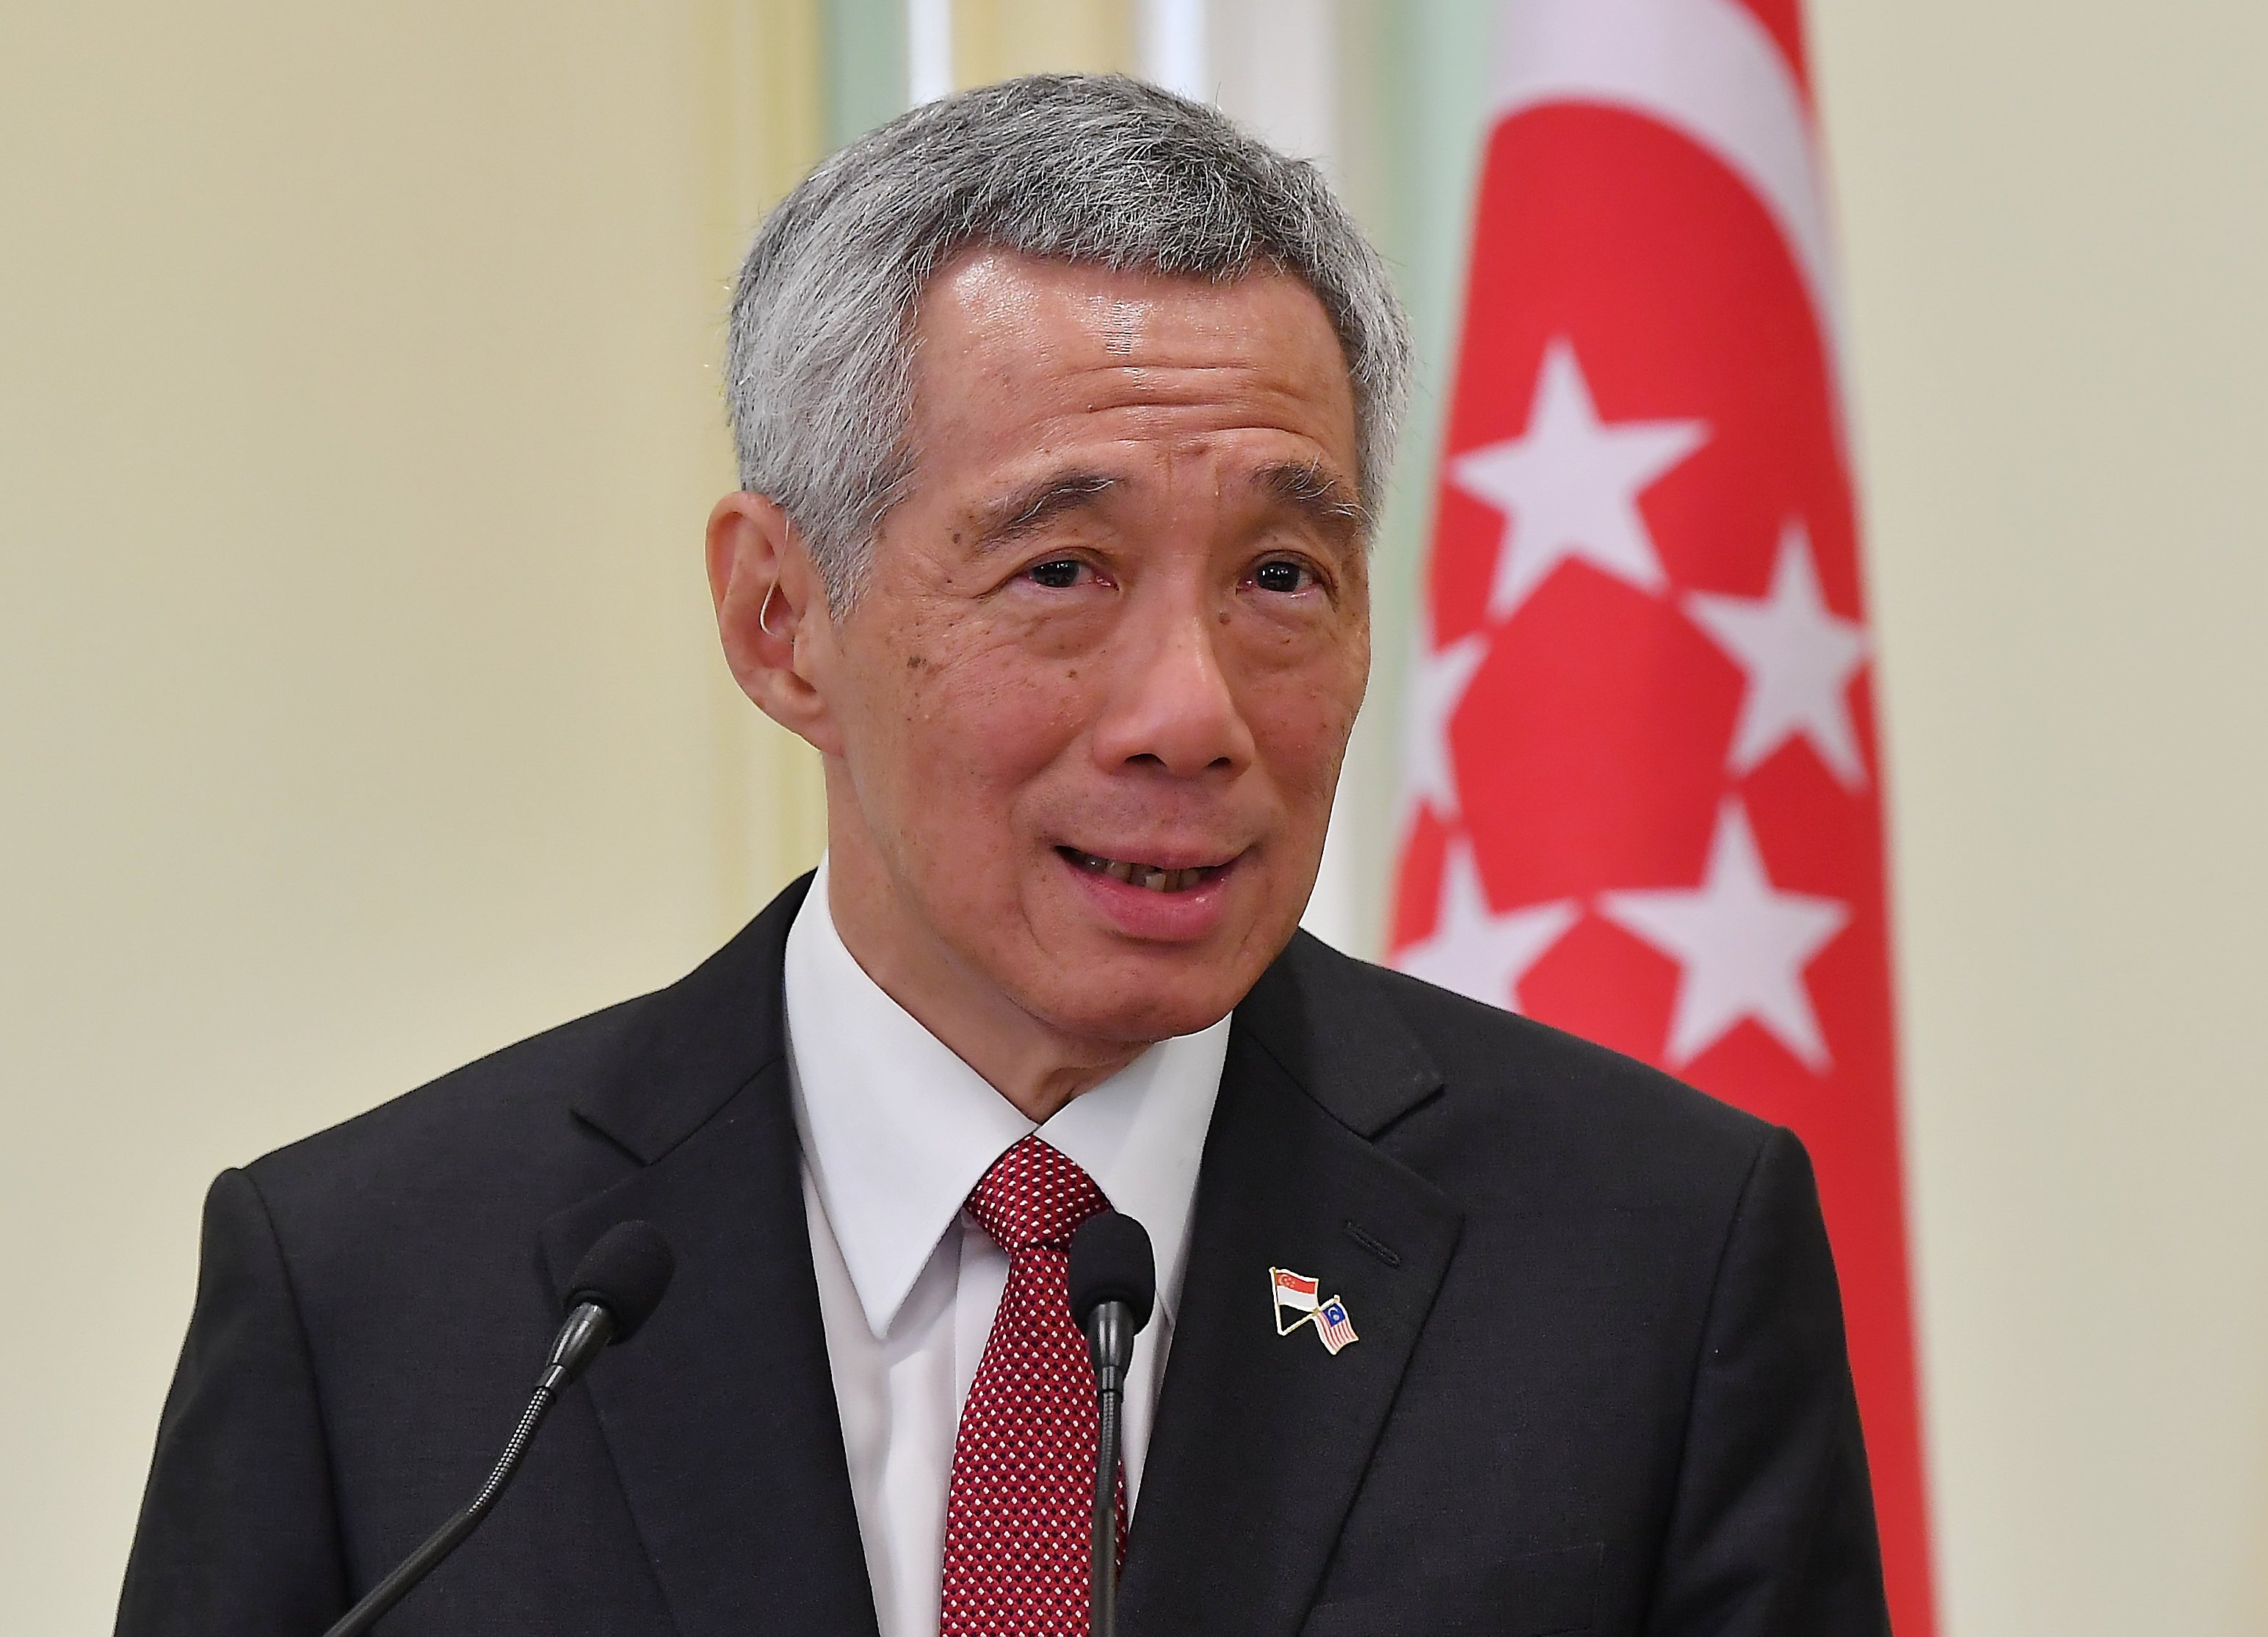 Singapore’s Prime Minister Lee Hsien Loong launched the defamation case in December 2018. Photo: DPA